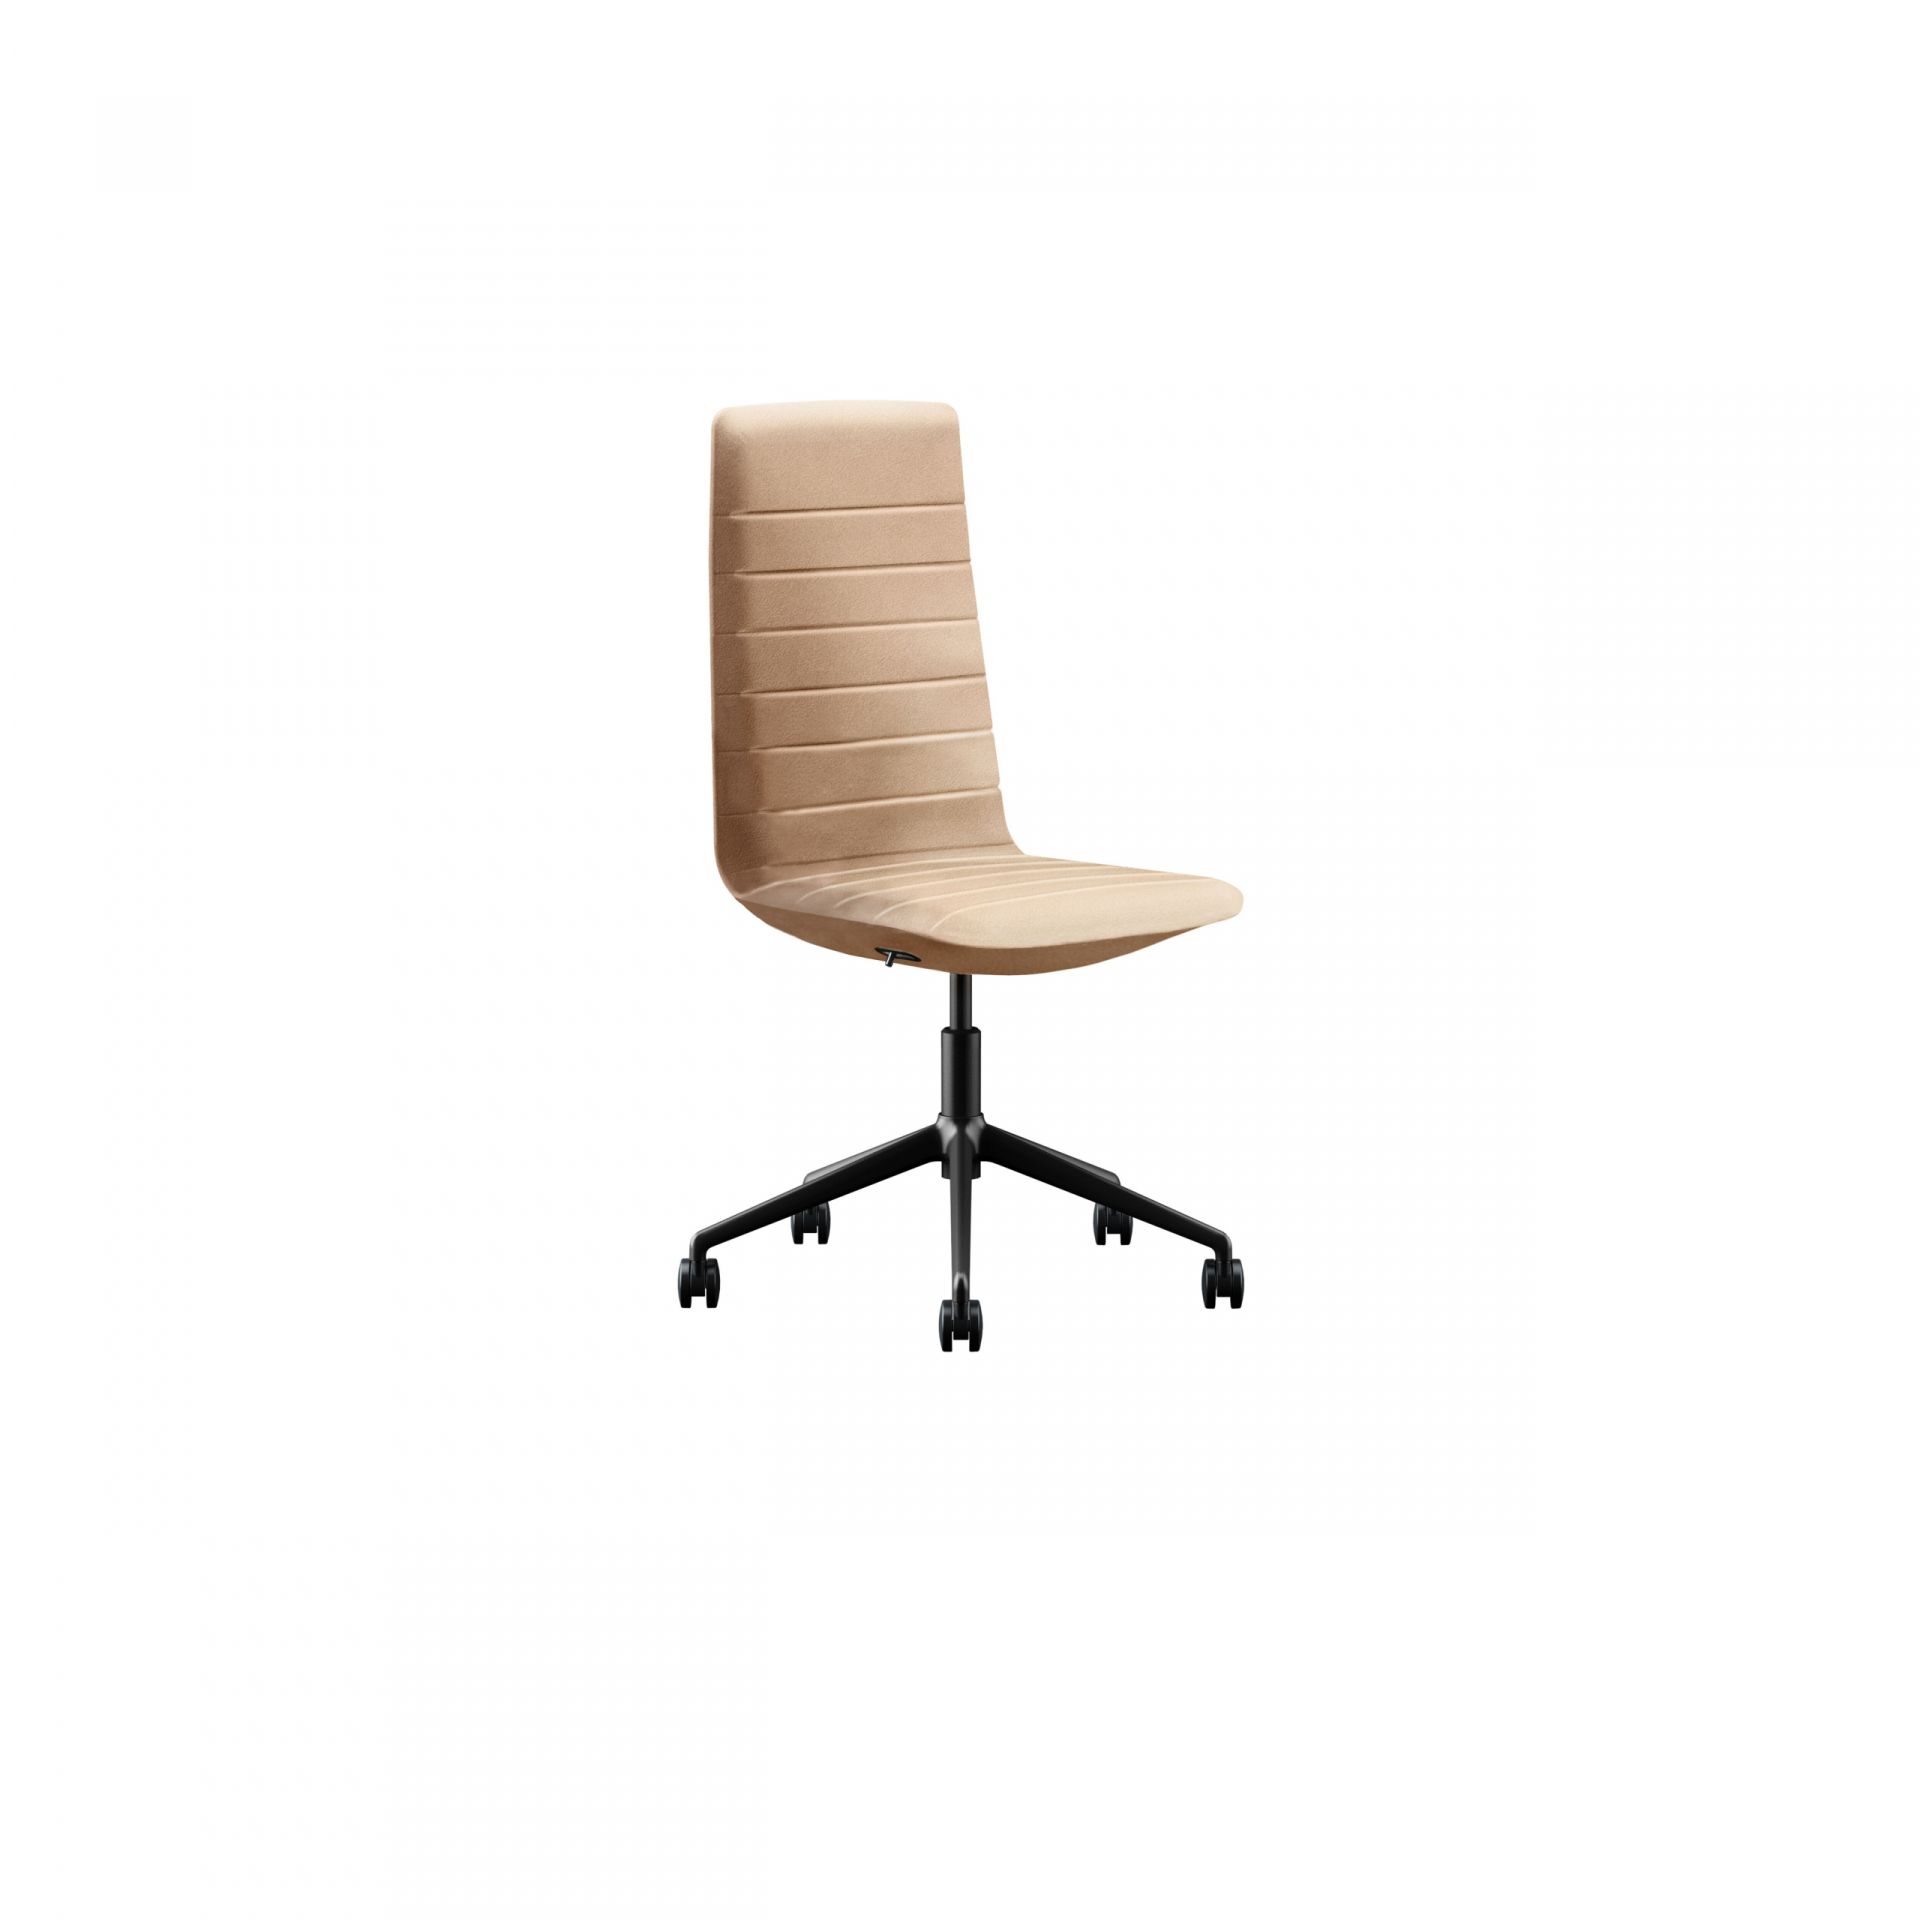 Favor Chair with swivel base product image 2